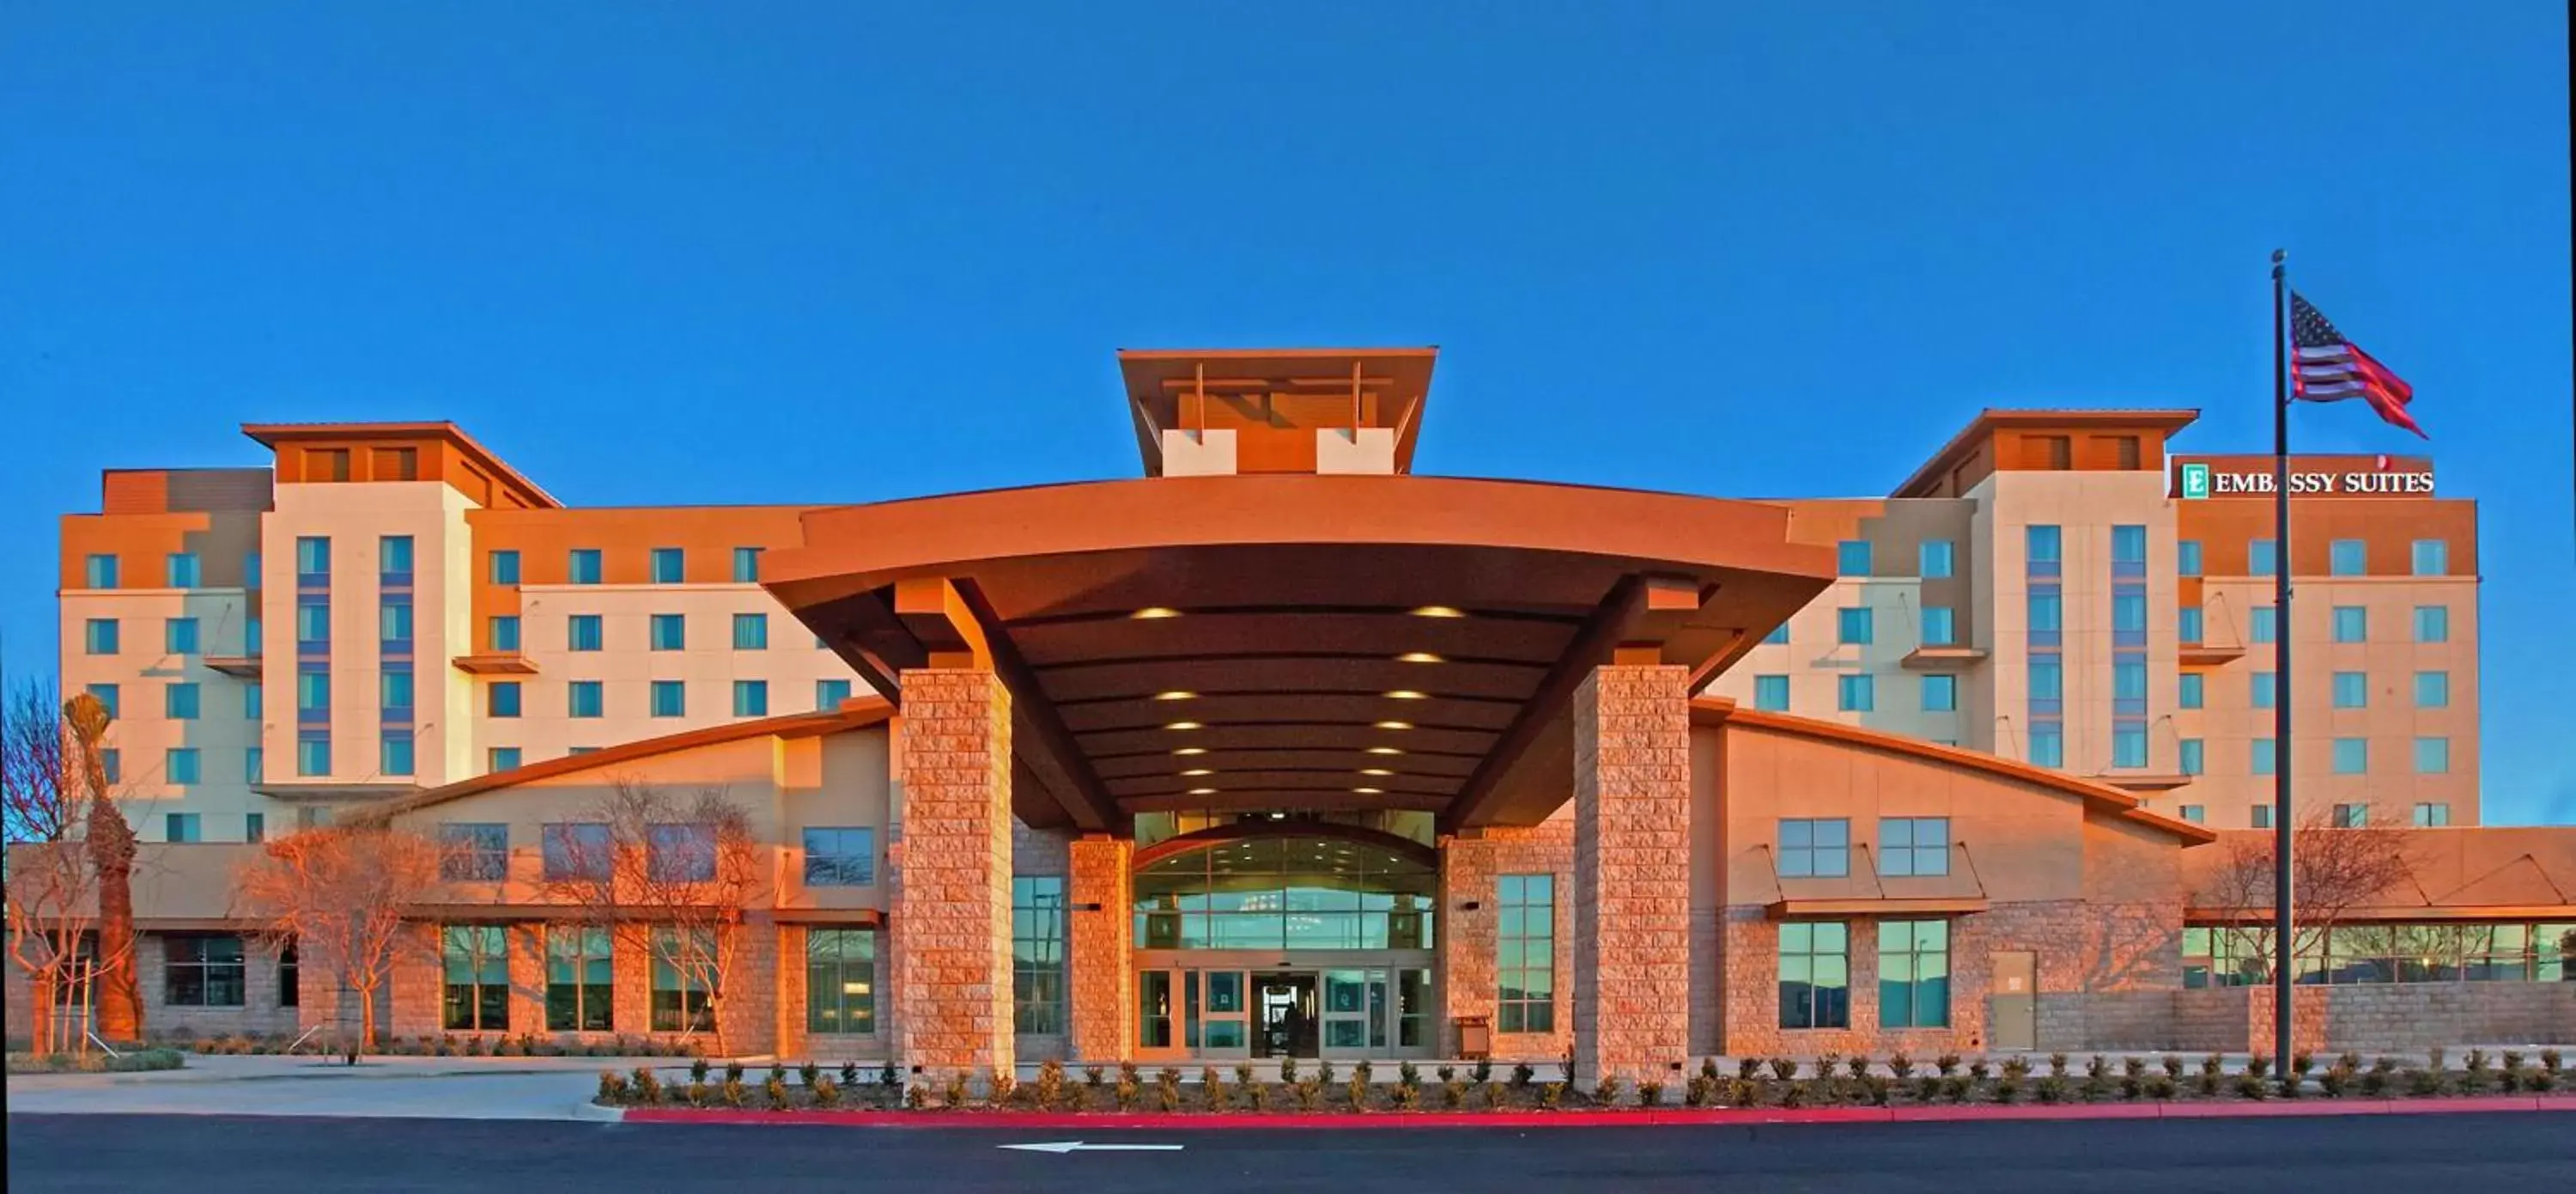 Property Building in Embassy Suites Palmdale